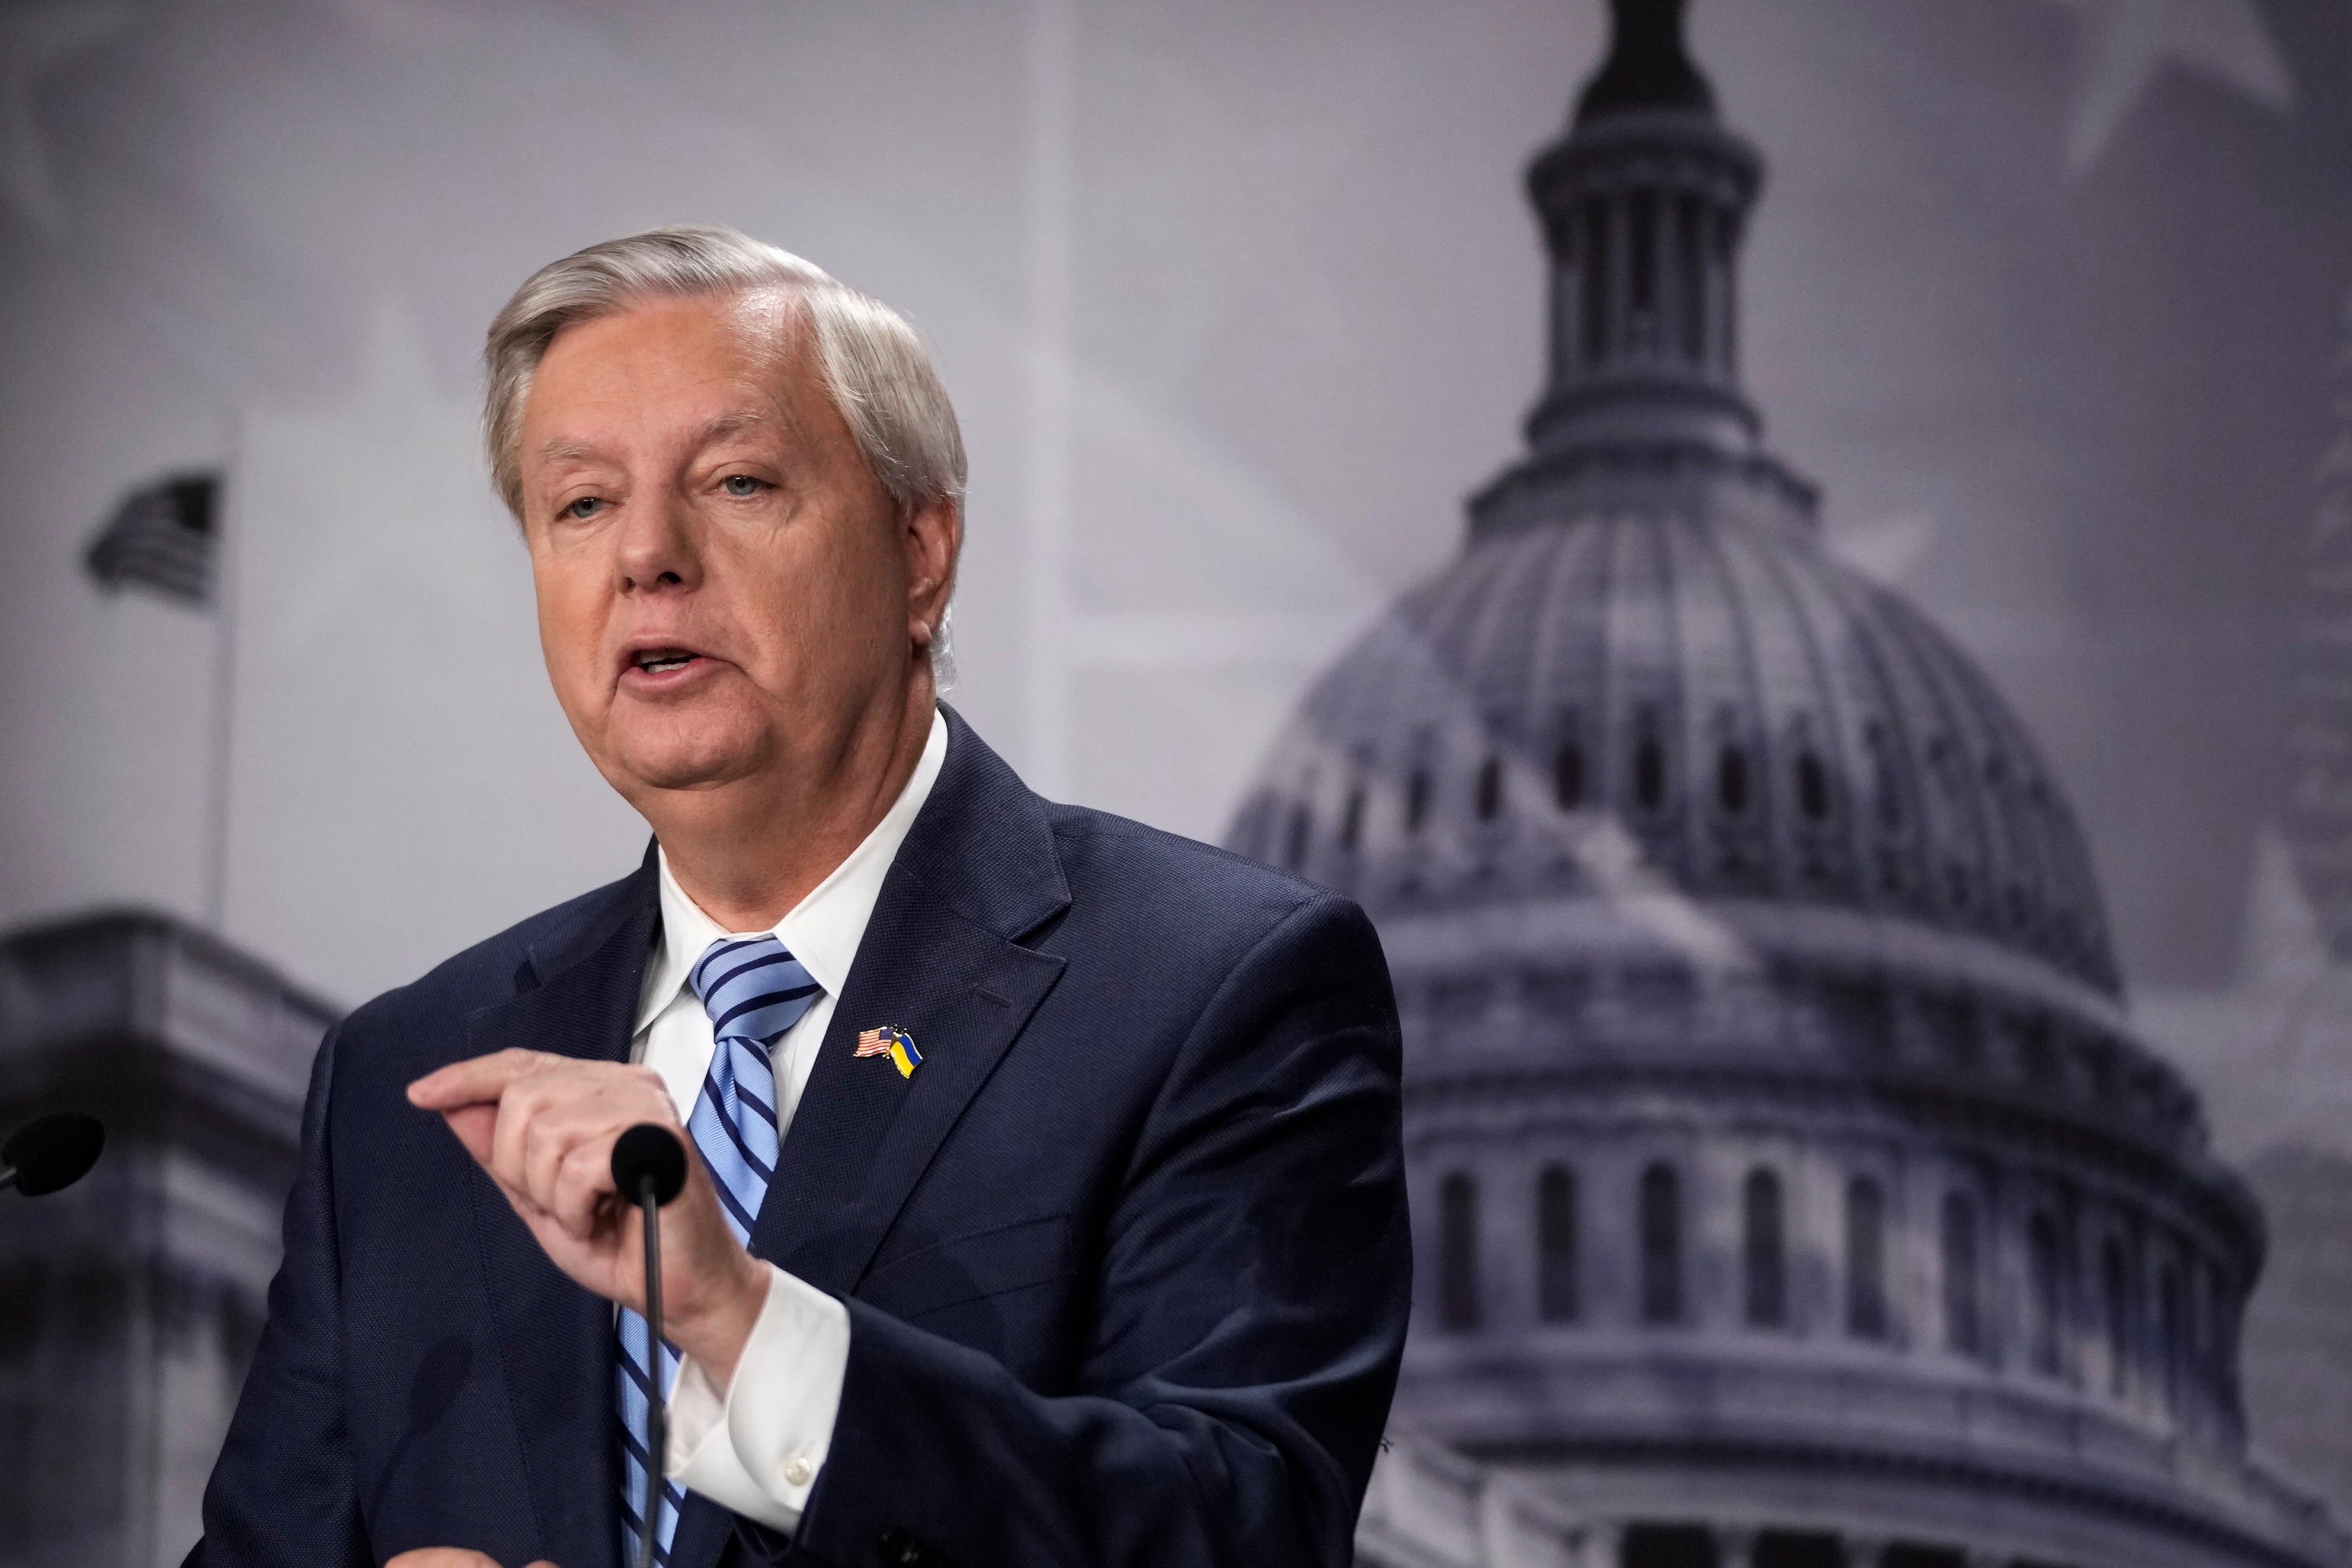 Sen. Lindsey Graham (R-SC) lobbied heavily for Biden to nominate J Michelle Childs, a judge from his native South Carolina